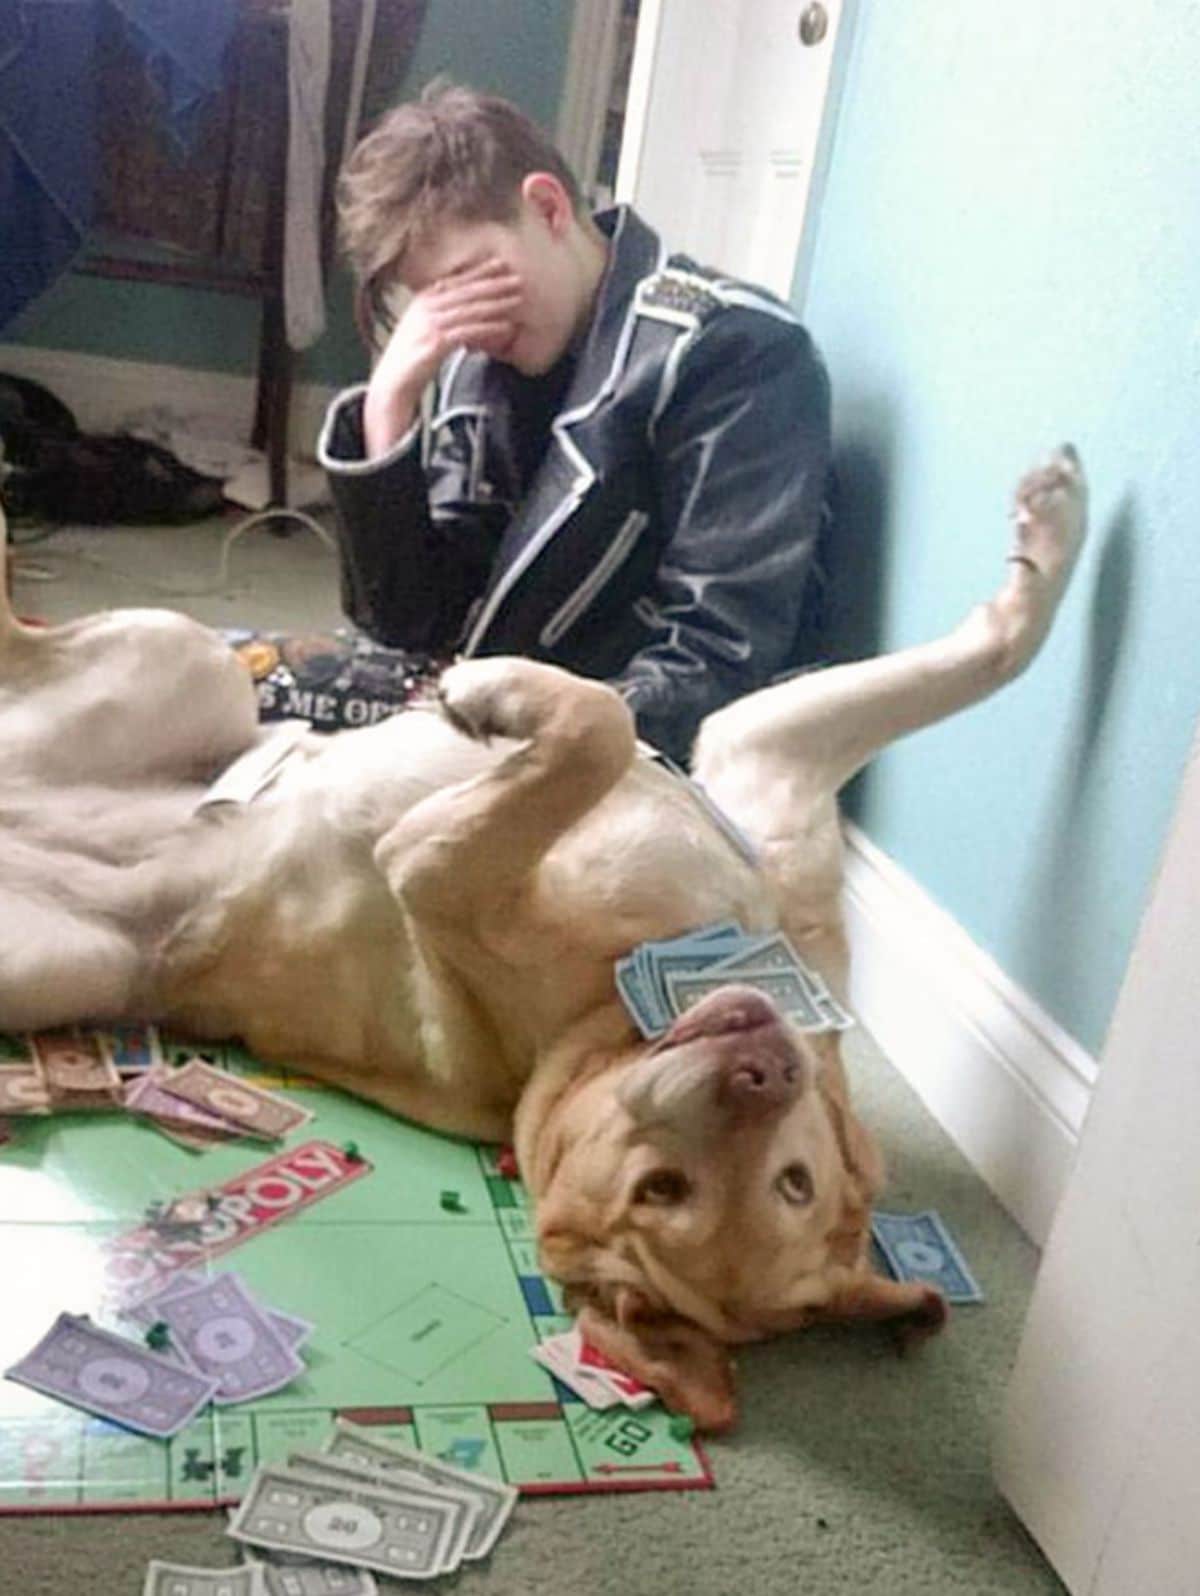 yellow labrador retriever laying belly up on a monopoly board holding monopoly money while someone is holding a hand to the face in frustration